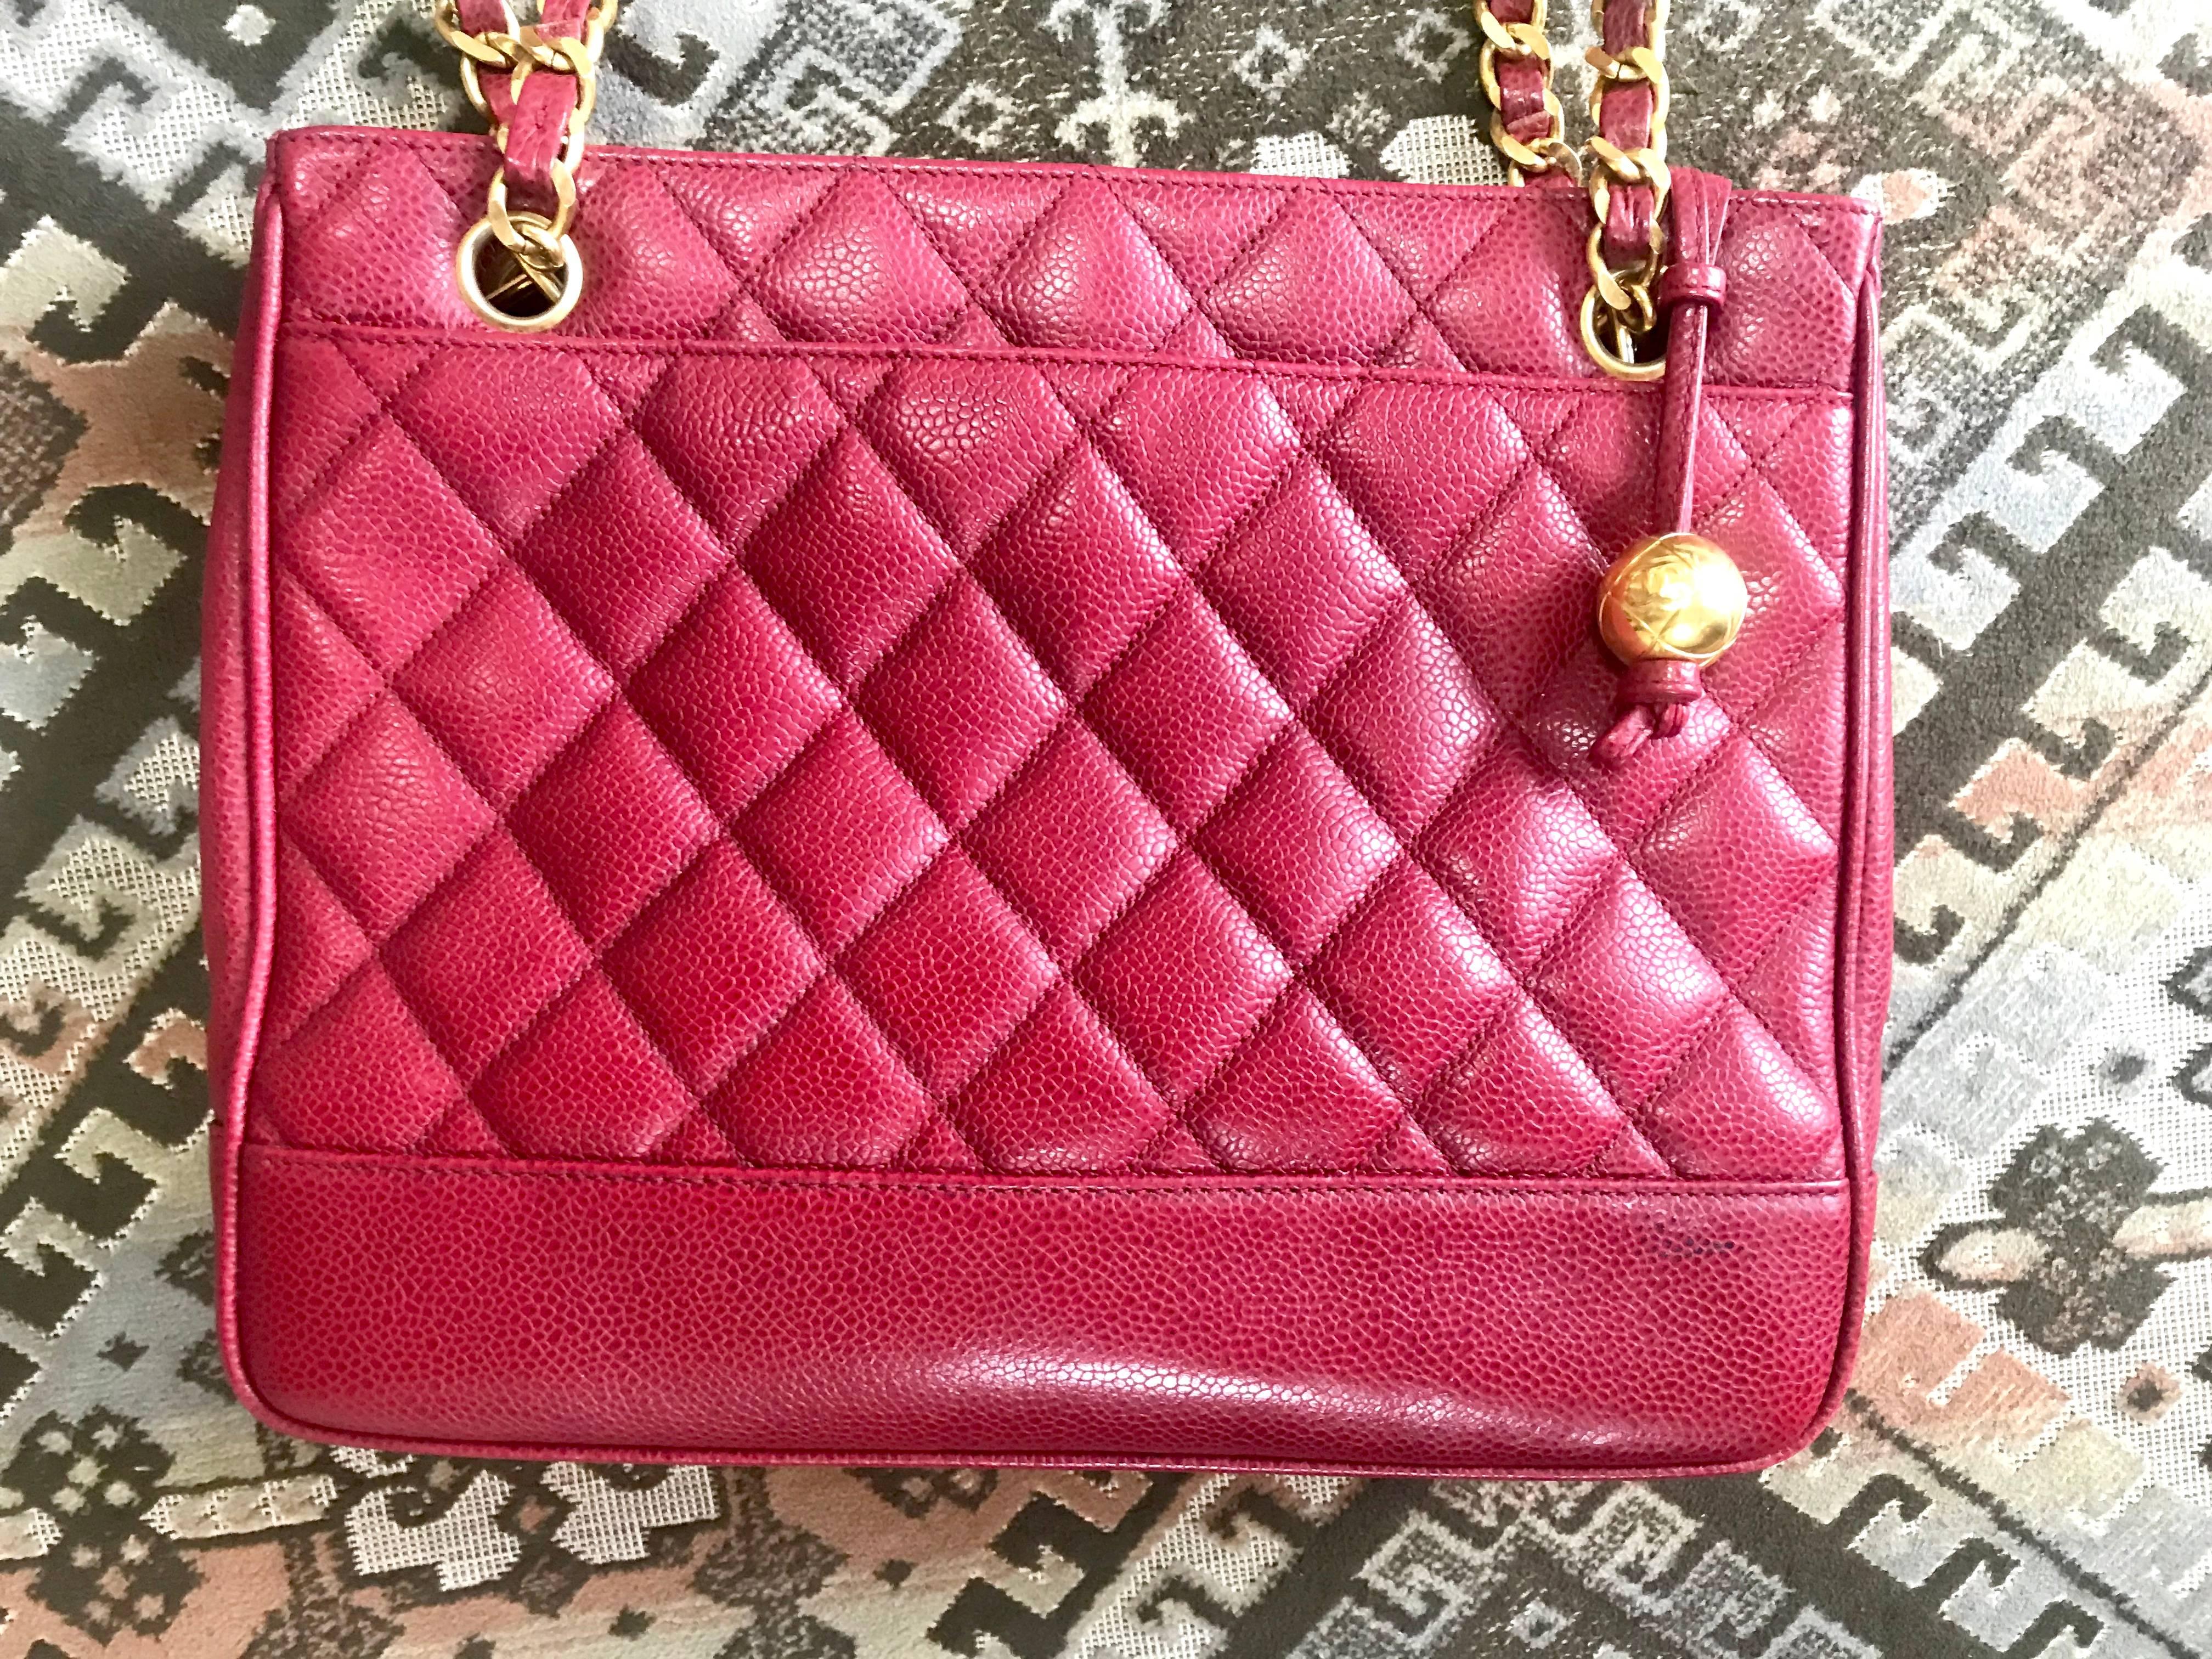 1990s. Vintage CHANEL cherry red caviar leather quilted shoulder bag, tote with golden CC ball and chain straps. Classic bag.

This is a vintage red caviar leather quilted tote bag/shoulder bag from CHANEL in the 90’s. 
It comes with the gold tone